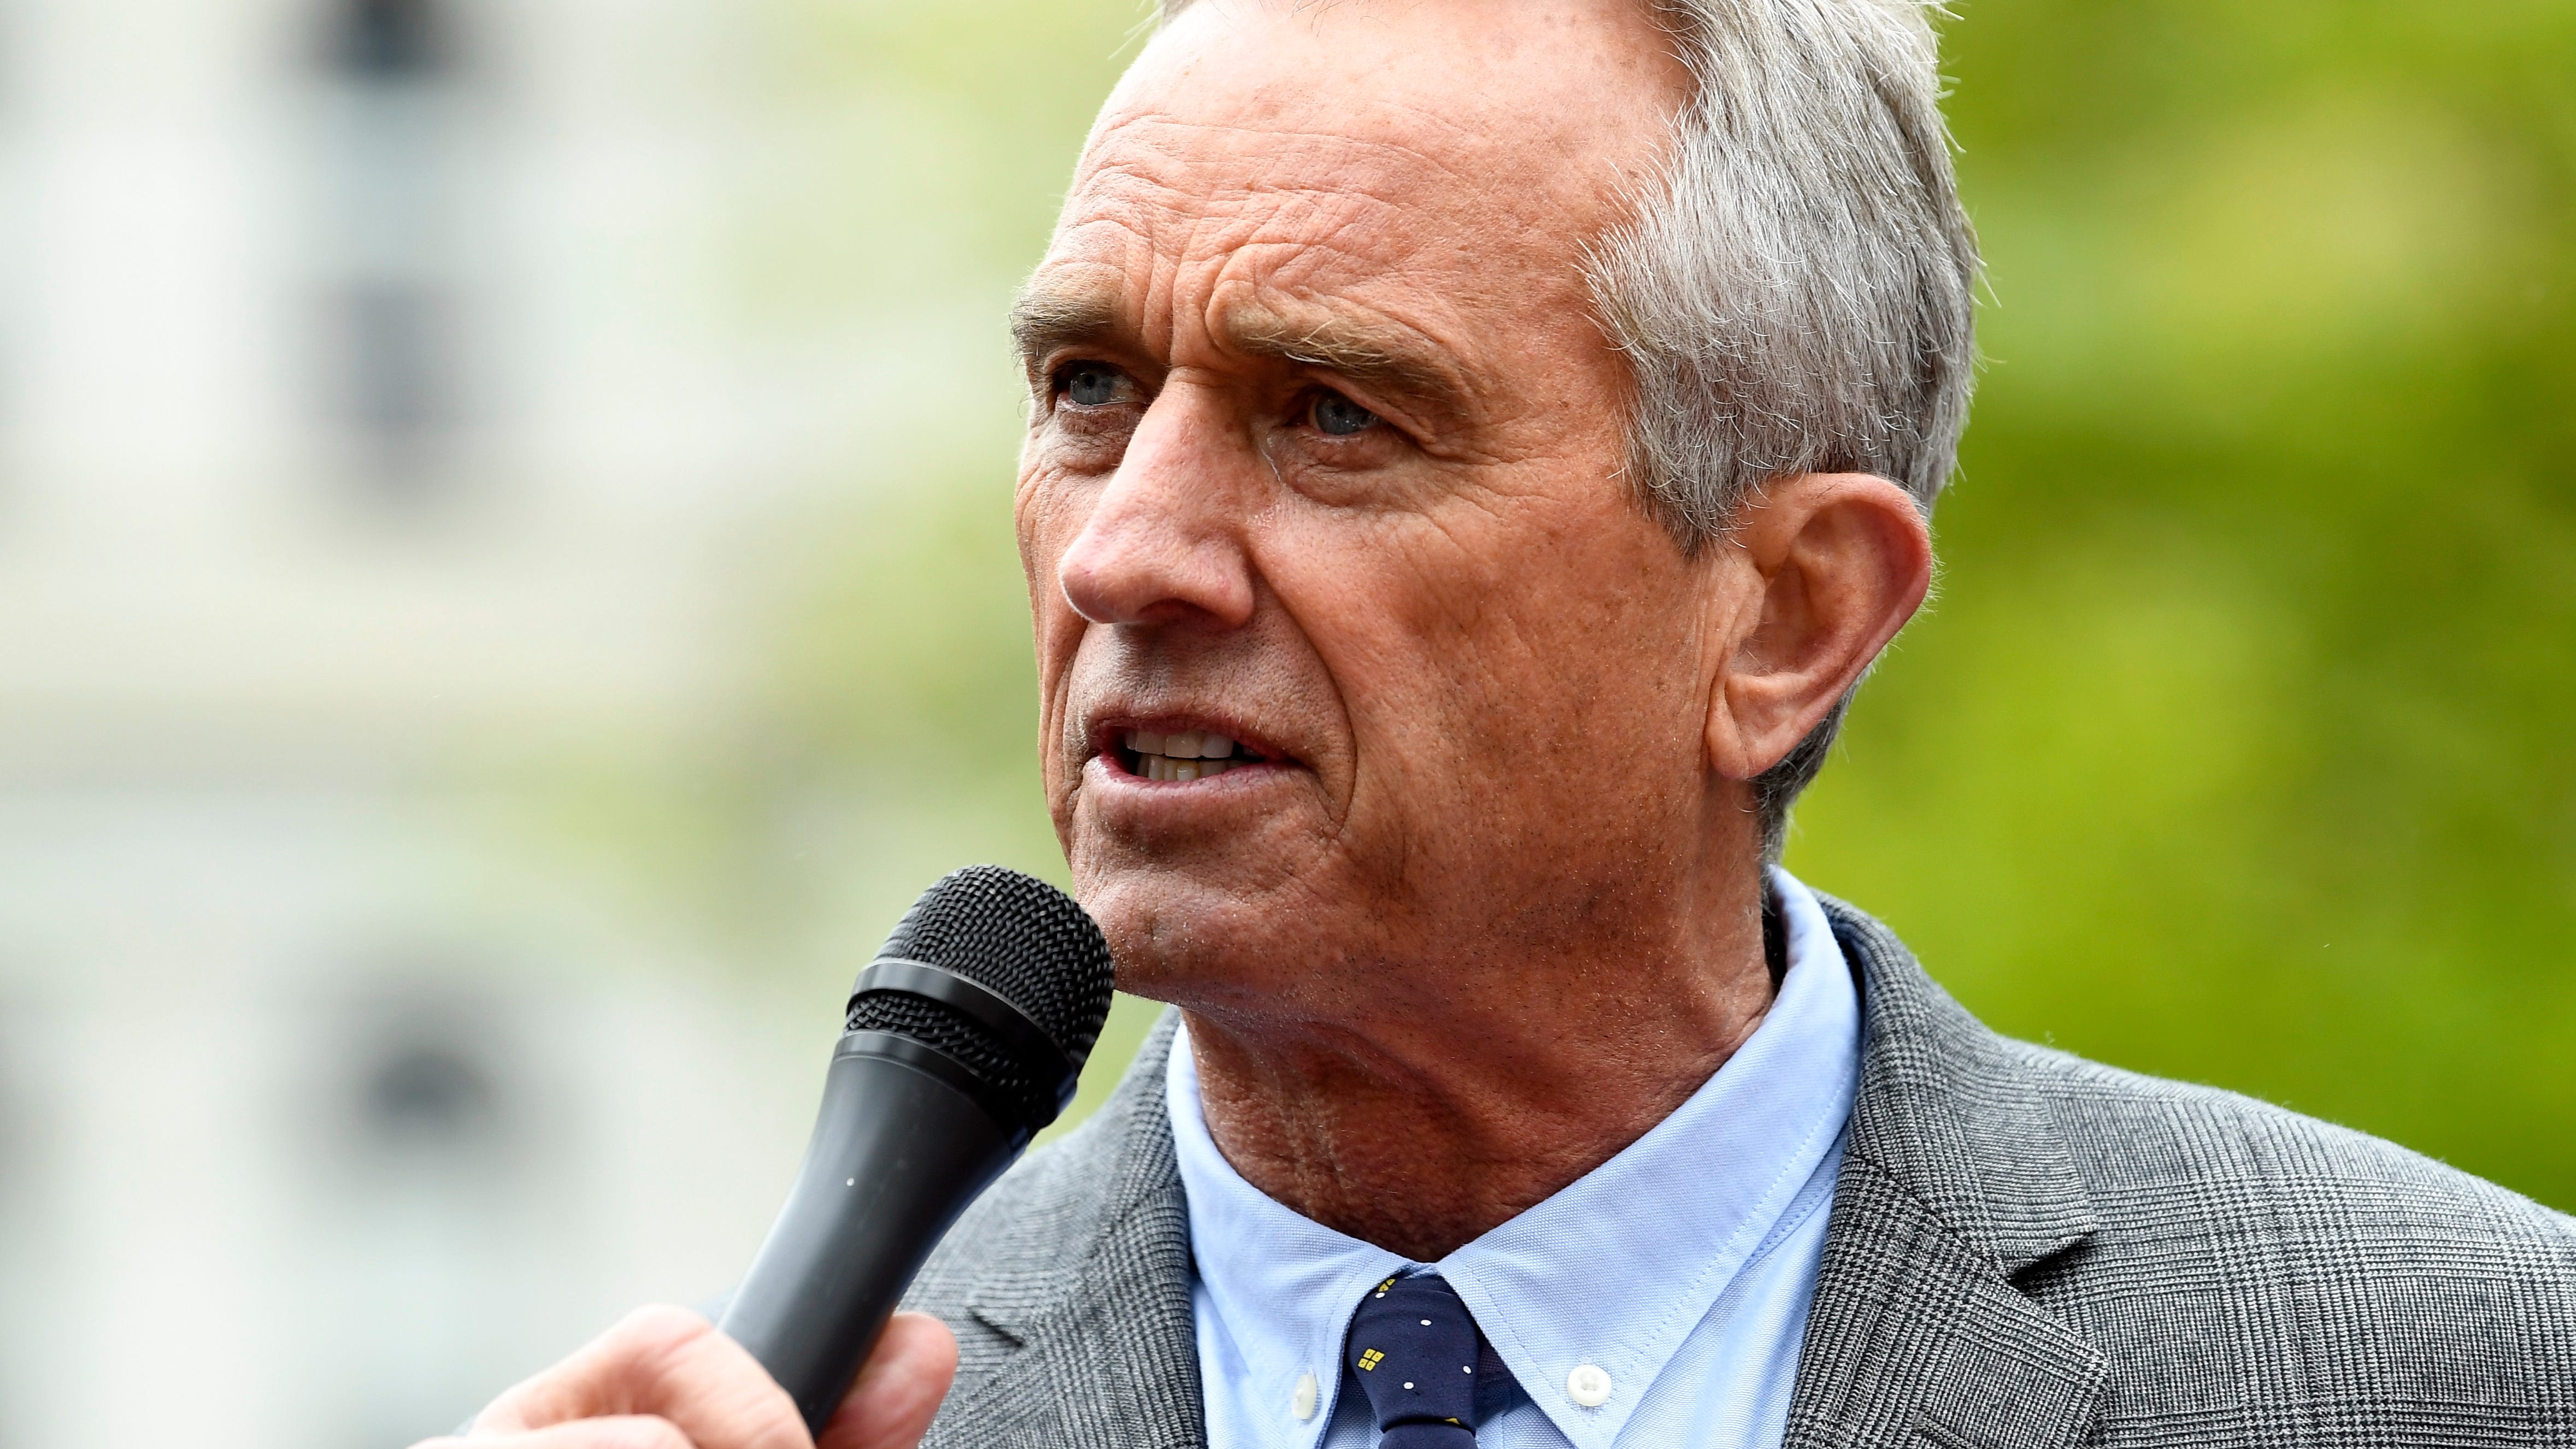 Attorney Robert F. Kennedy Jr. speaks at the New York State Capitol, May 14, 2019, in Albany, N.Y. Kennedy Jr., an anti-vaccine activist and scion of one of the country's most famous political families, is running for president. Kennedy, a Democrat, filed a statement of candidacy Wednesday, April 6, 2023, with the Federal Election Commission.